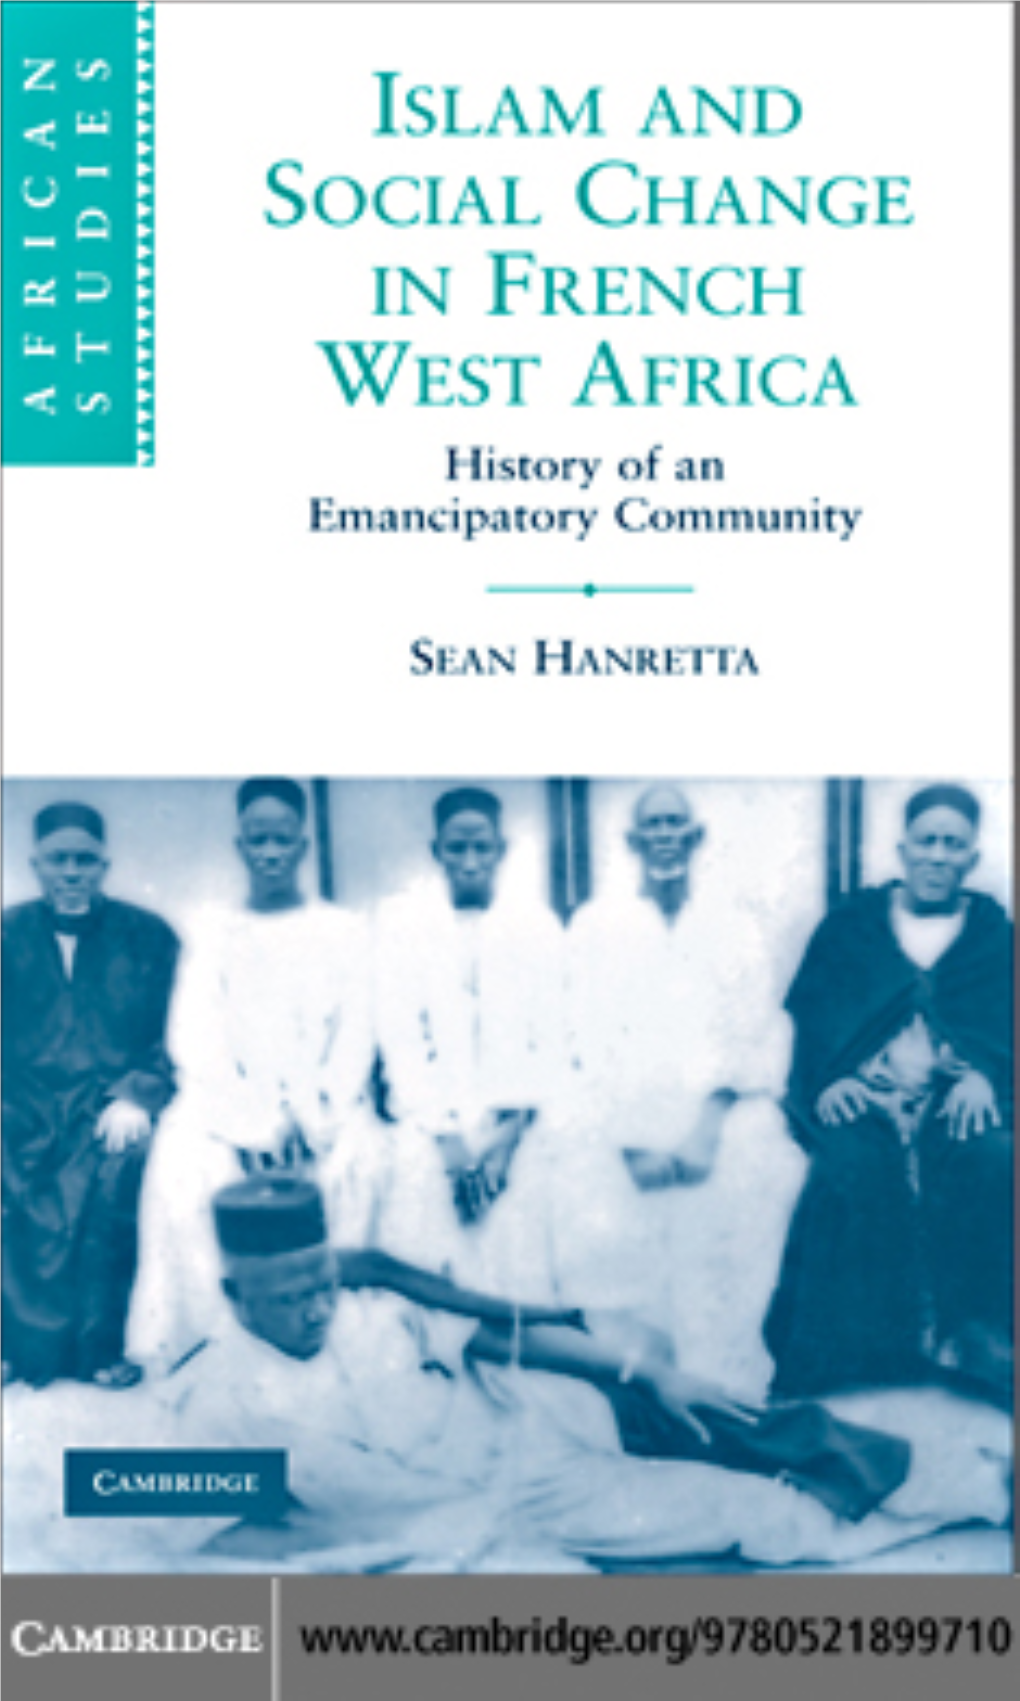 Islam and Social Change in French West Africa History of an Emancipatory Community